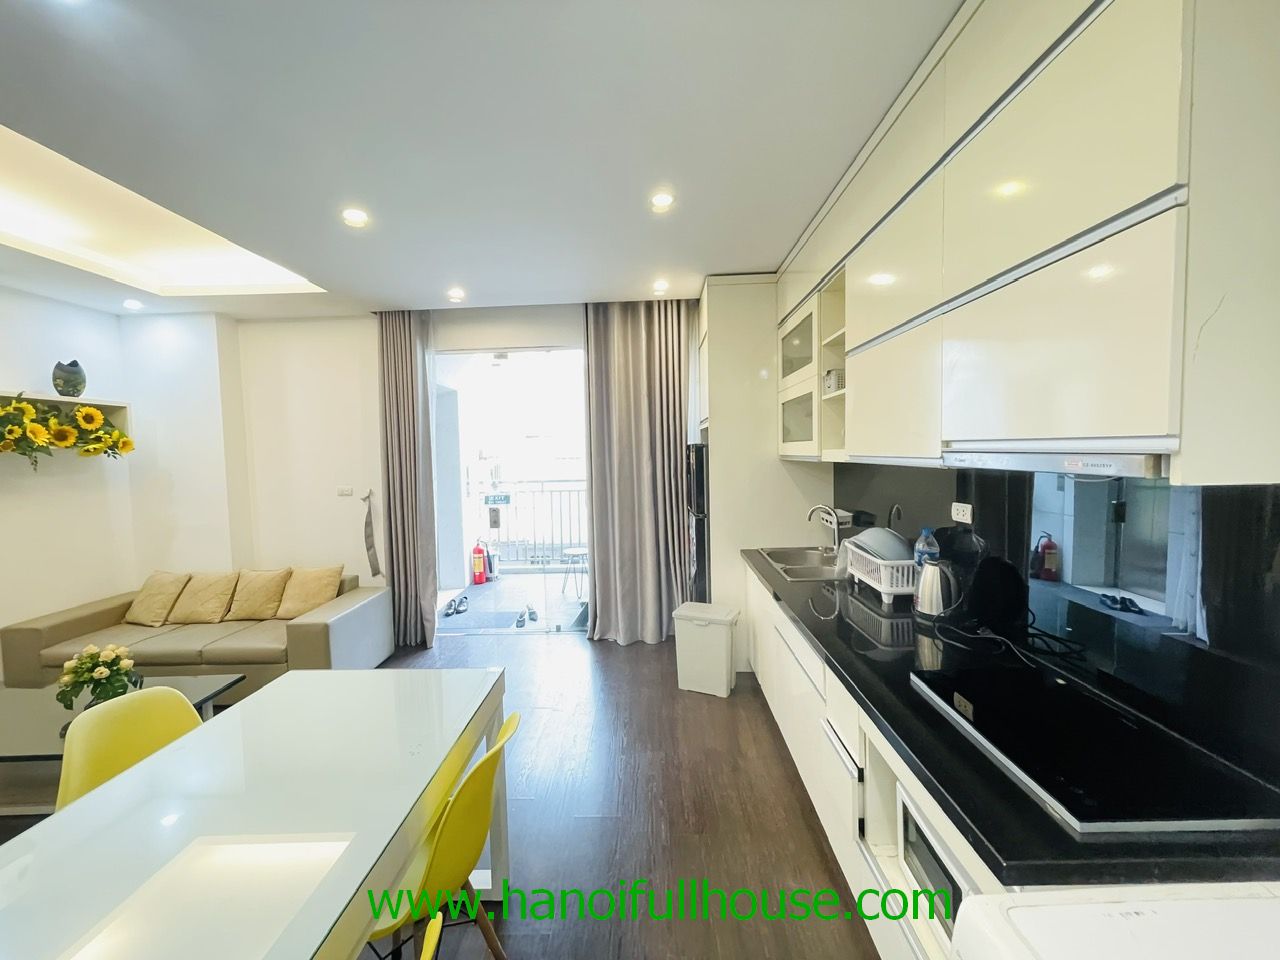 2 bedroom apartment with cheap price in Tay Ho for lease